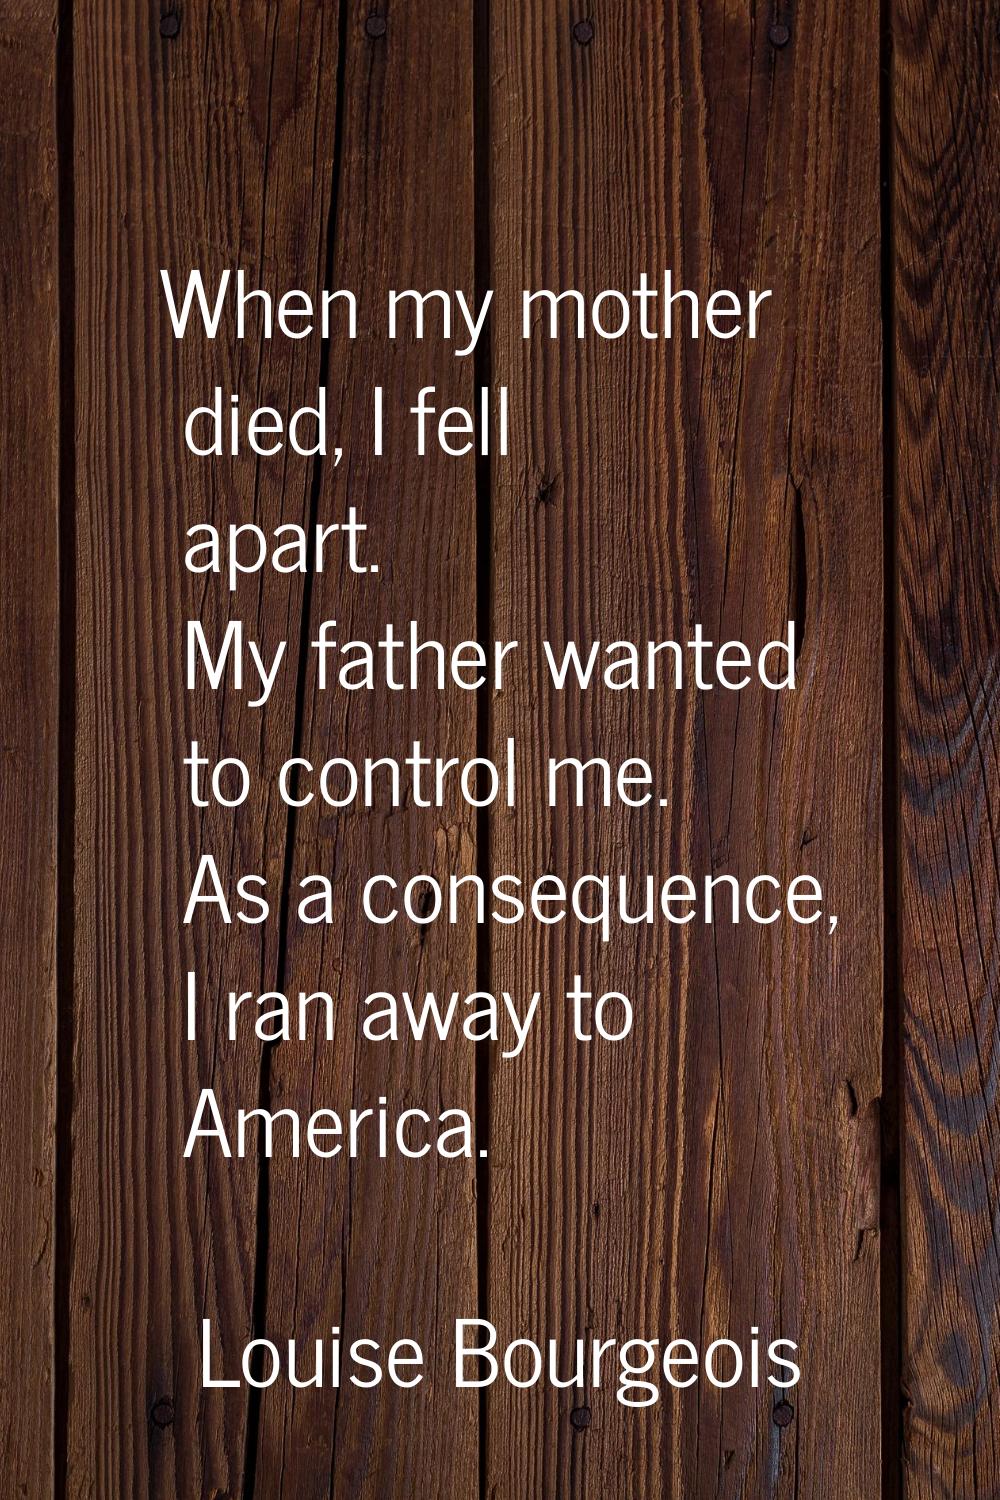 When my mother died, I fell apart. My father wanted to control me. As a consequence, I ran away to 